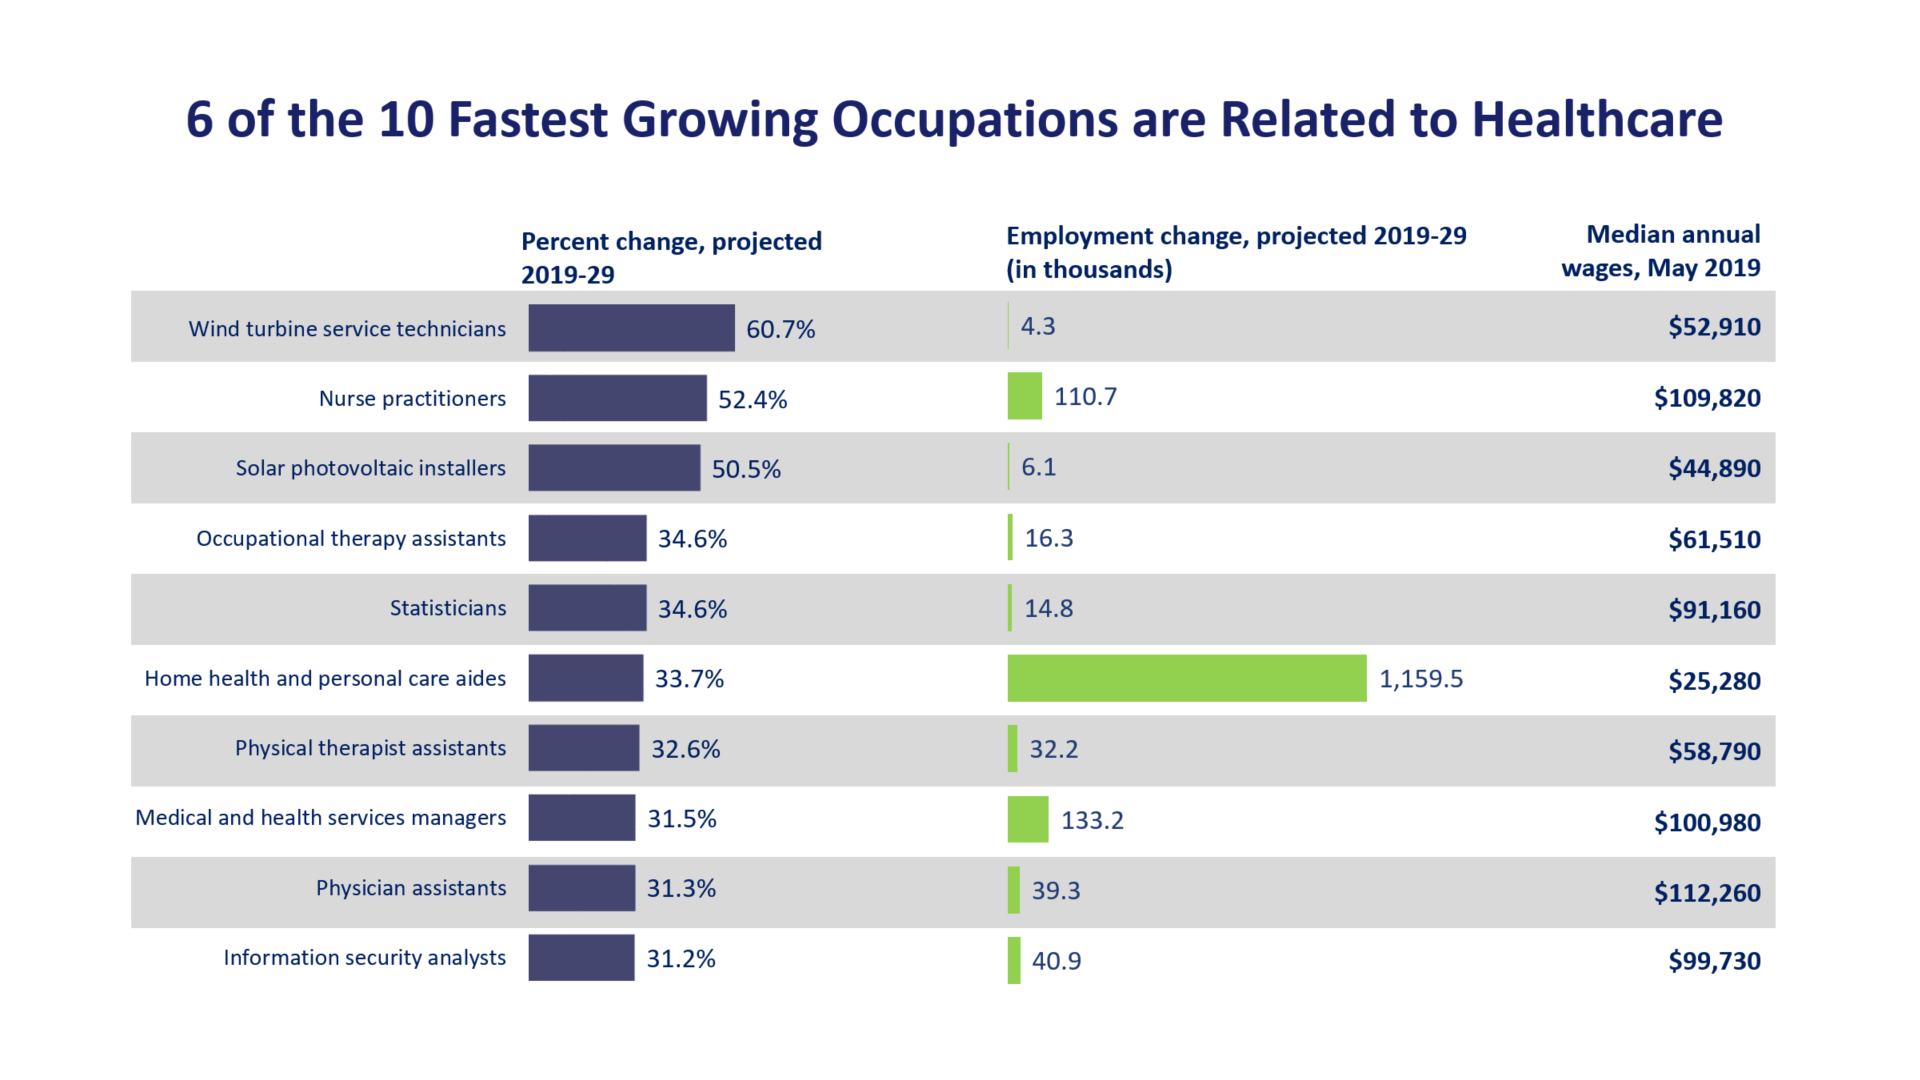 Six of the 10 fastest growing occupations are related to healthcare